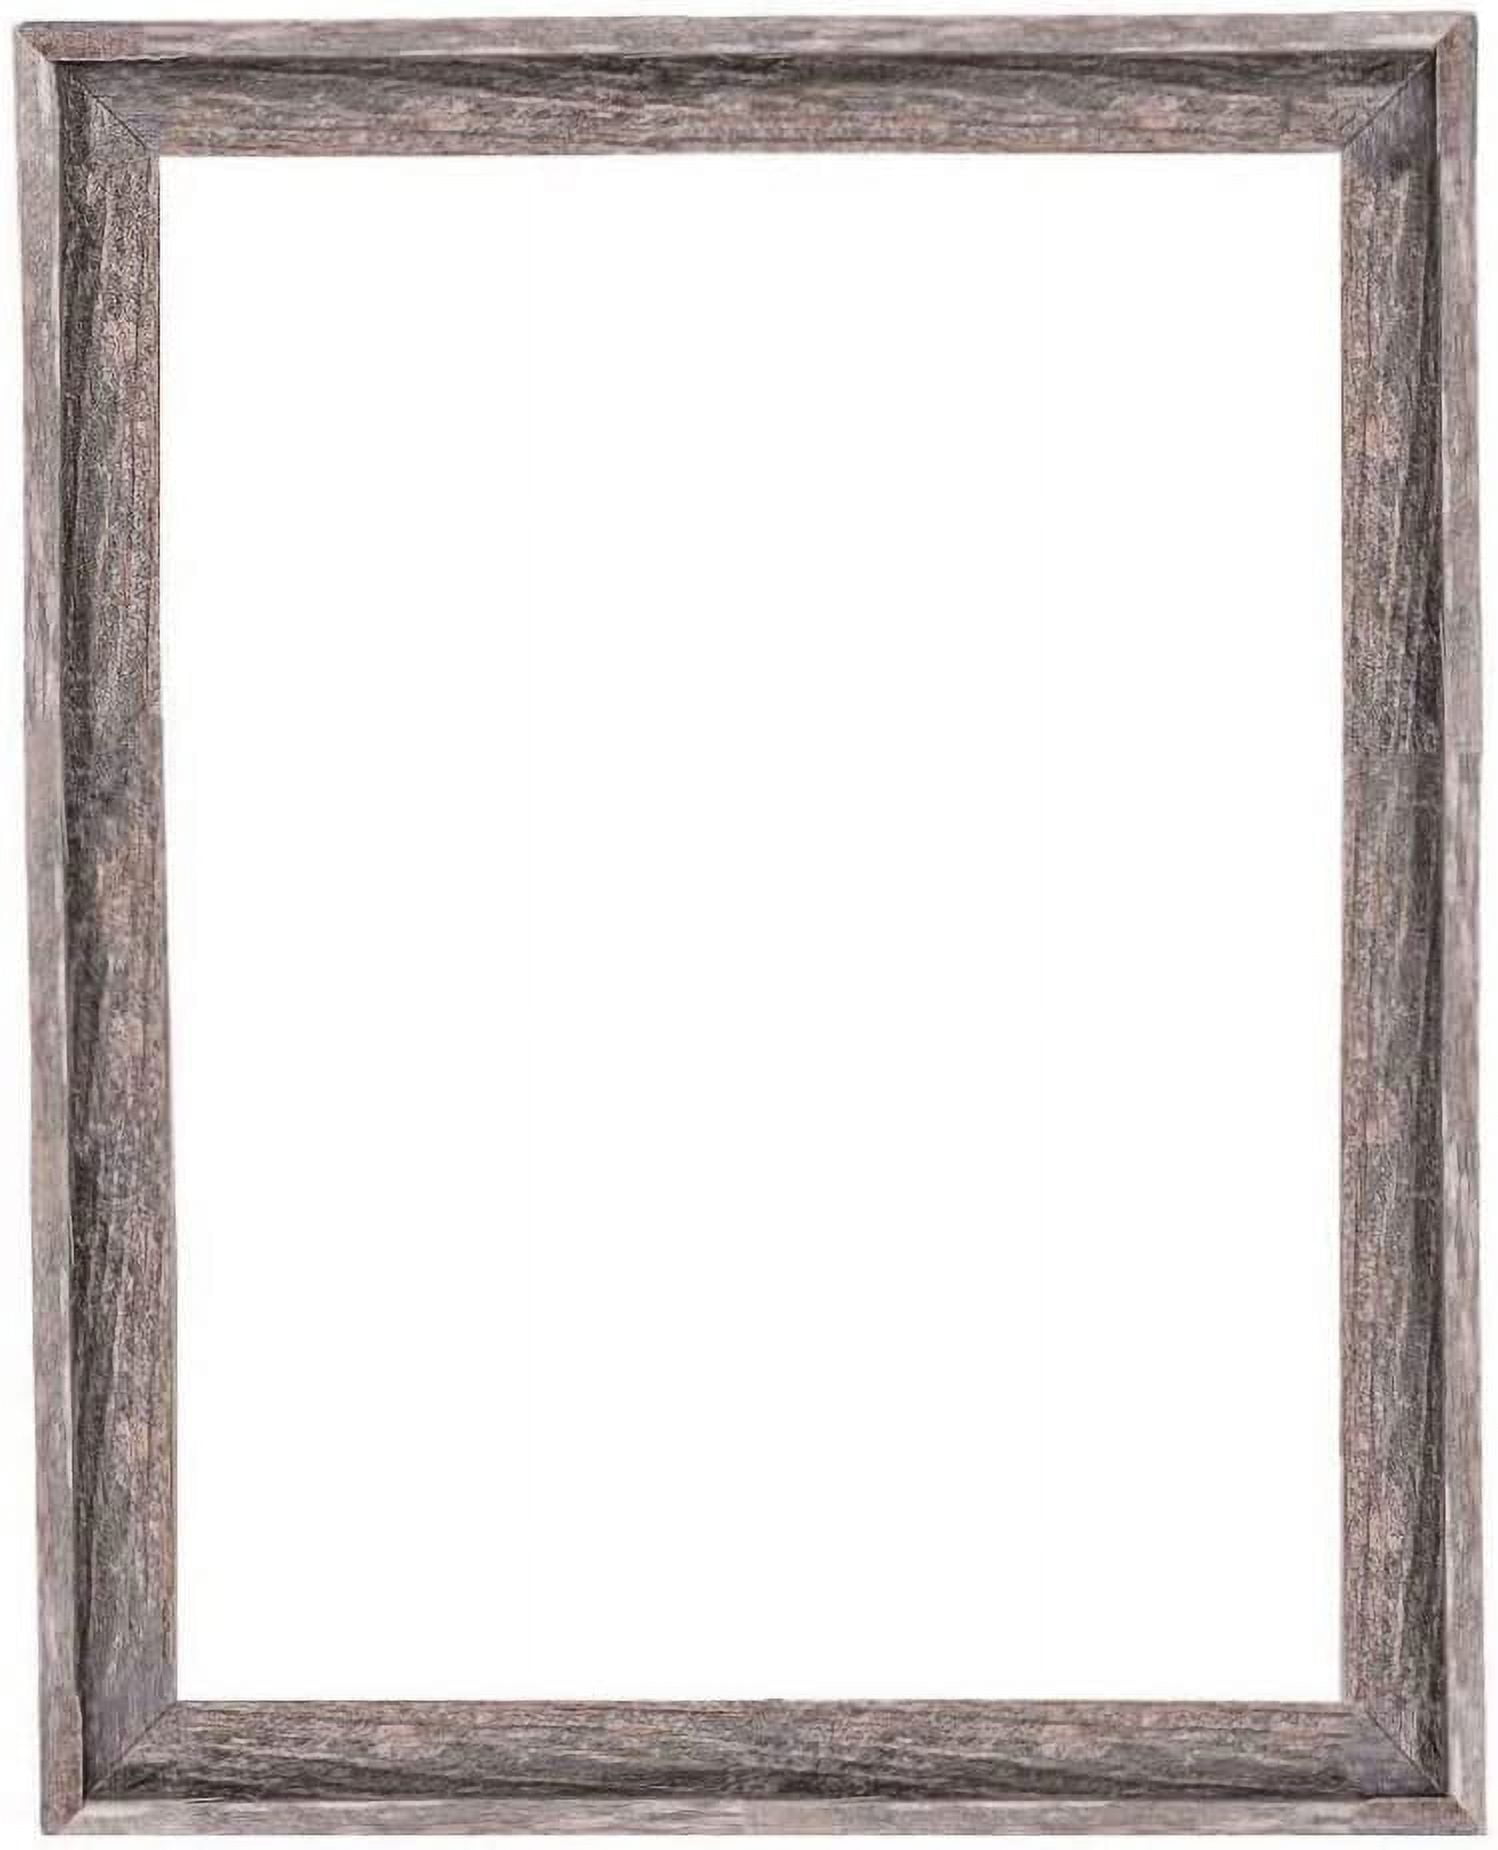 Wedding Planners Special  25 - 4x6 Rustic Reclaimed Barn Wood Standard  Photo Frame - Rustic Decor